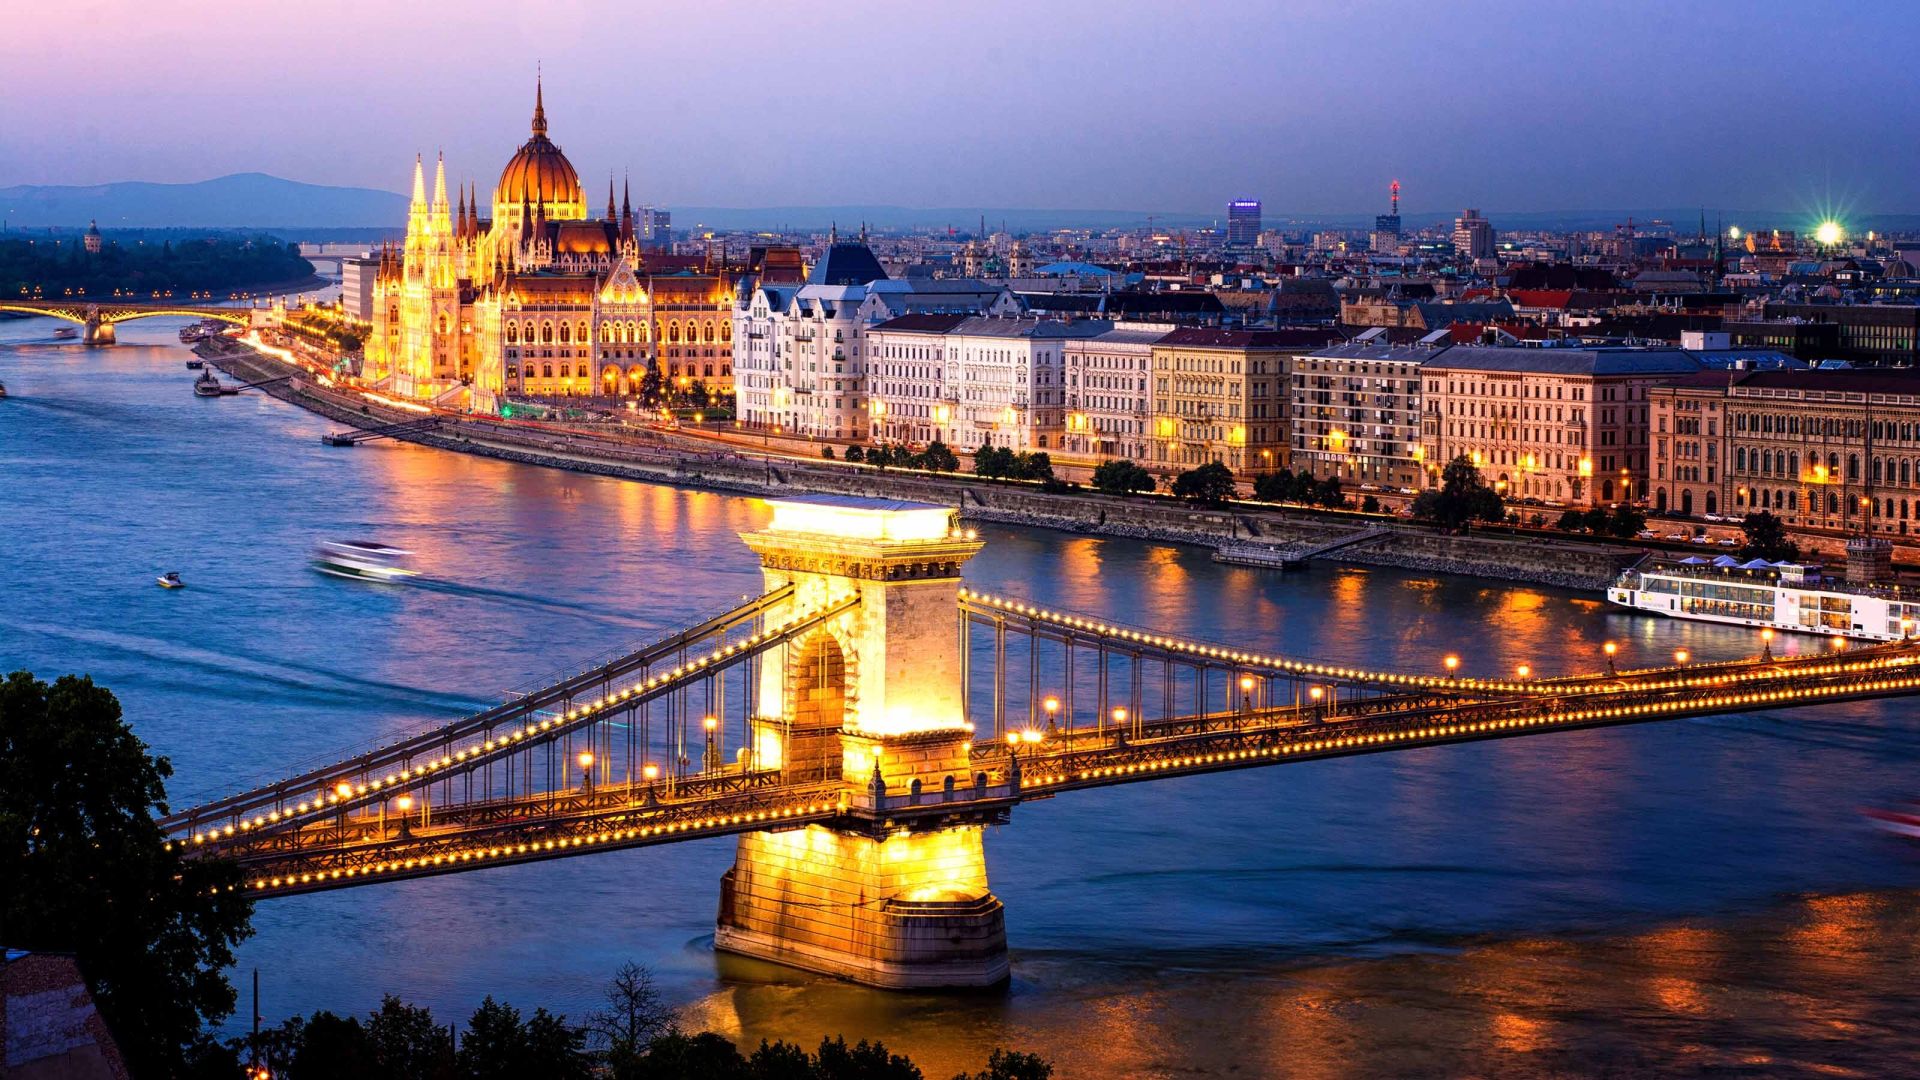 <p>                     <strong>Average daily cost: $70 <br> Average accommodation cost: $33 <br> Average daily meals cost: $17</strong>                   </p>                                      <p>                     At the crossroads of Europe, Hungary has managed to keep its quaint villages, while Budapest — the “city of lights” — still reigns as a metropolitan center. You’ve most likely seen the spectacular Hungarian Parliament building sitting on the Danube River. Hungary’s countryside includes beautiful scenery with mountains, rivers, and lush valleys.                   </p>